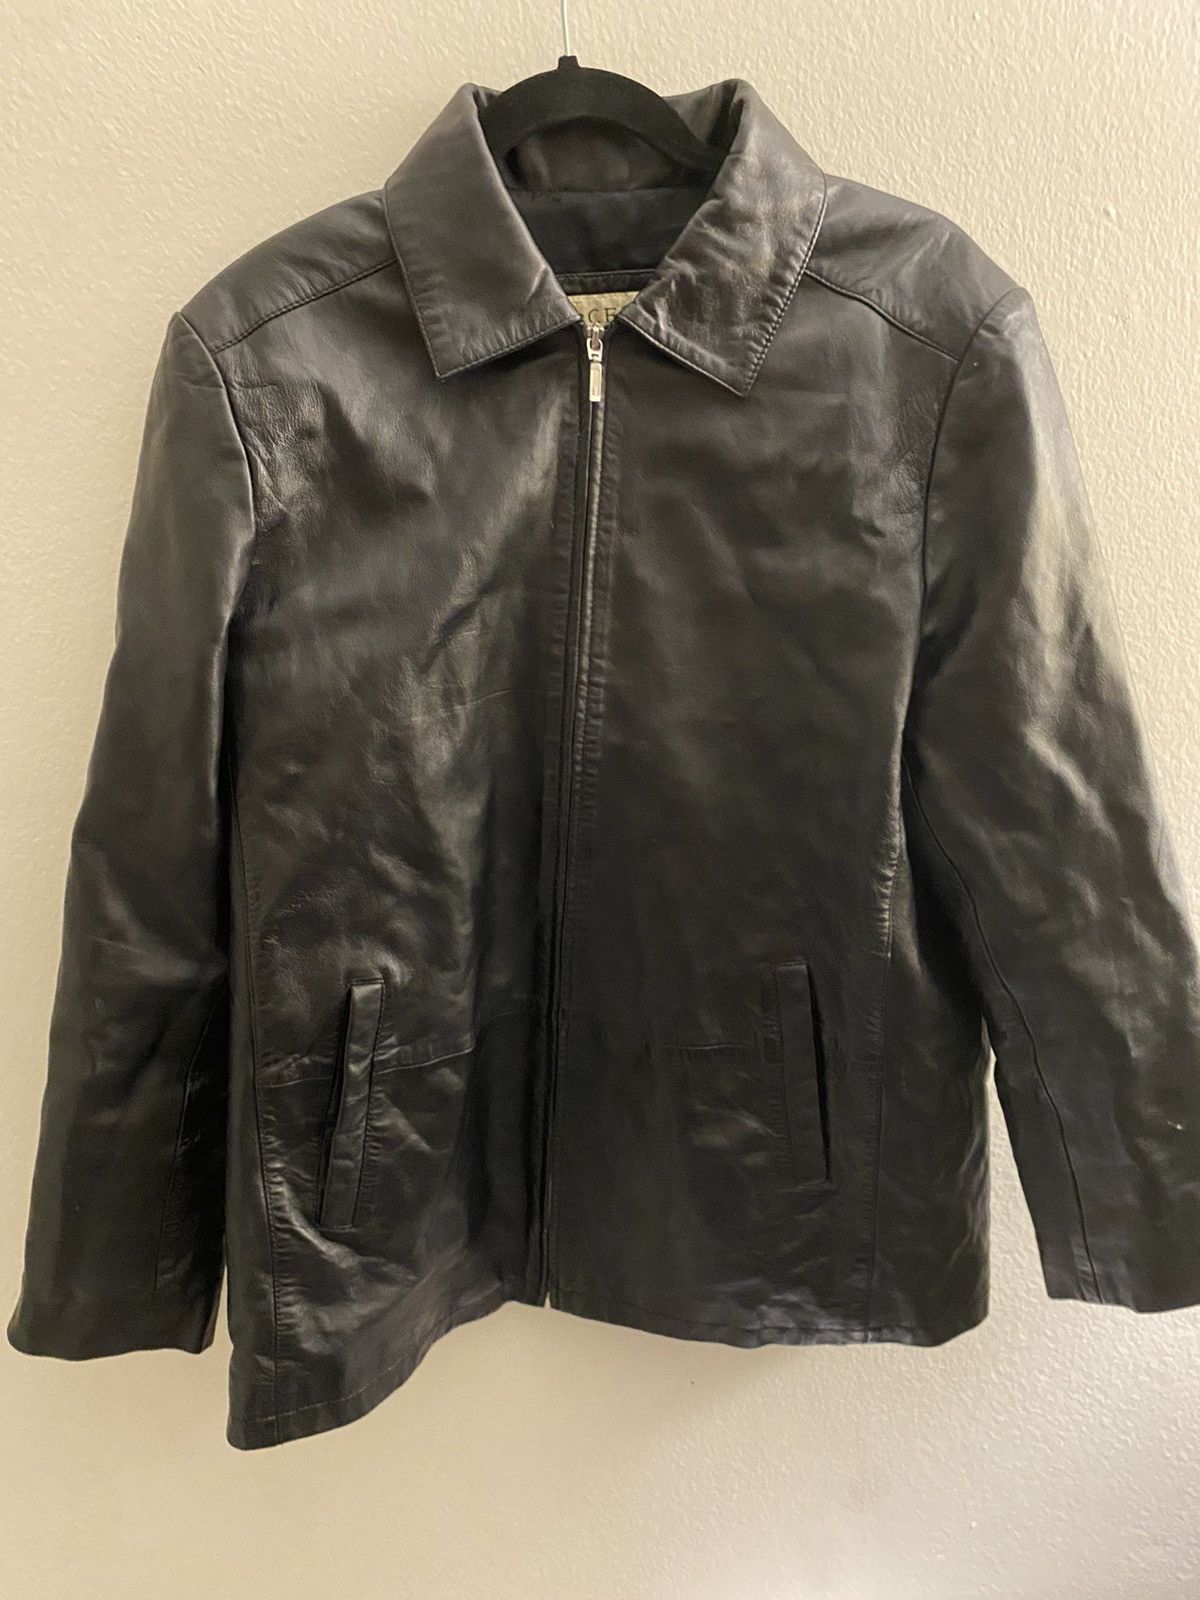 Excelled Vintage Excelled Leather Jacket | Grailed